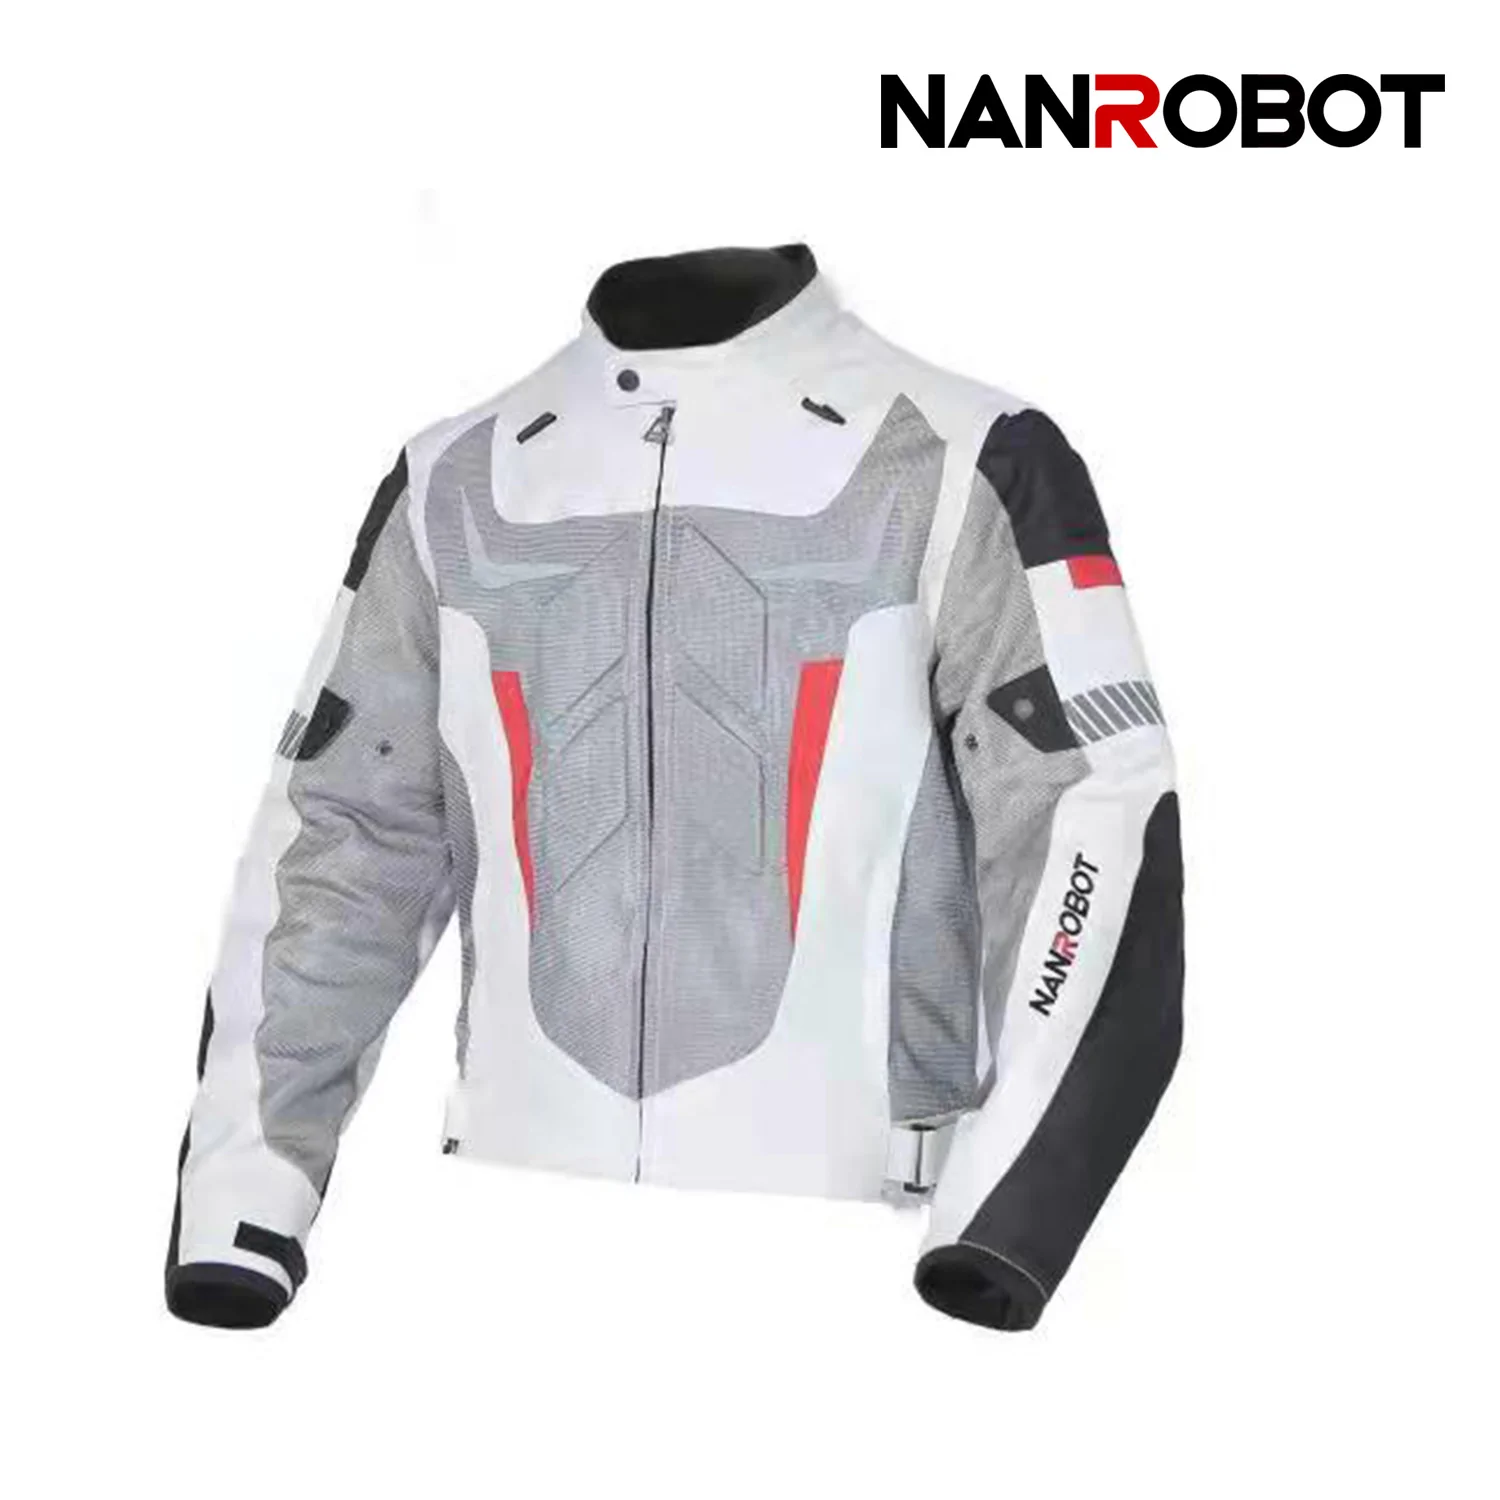 Nanrobot breathable cycling Jersey set Featured Image